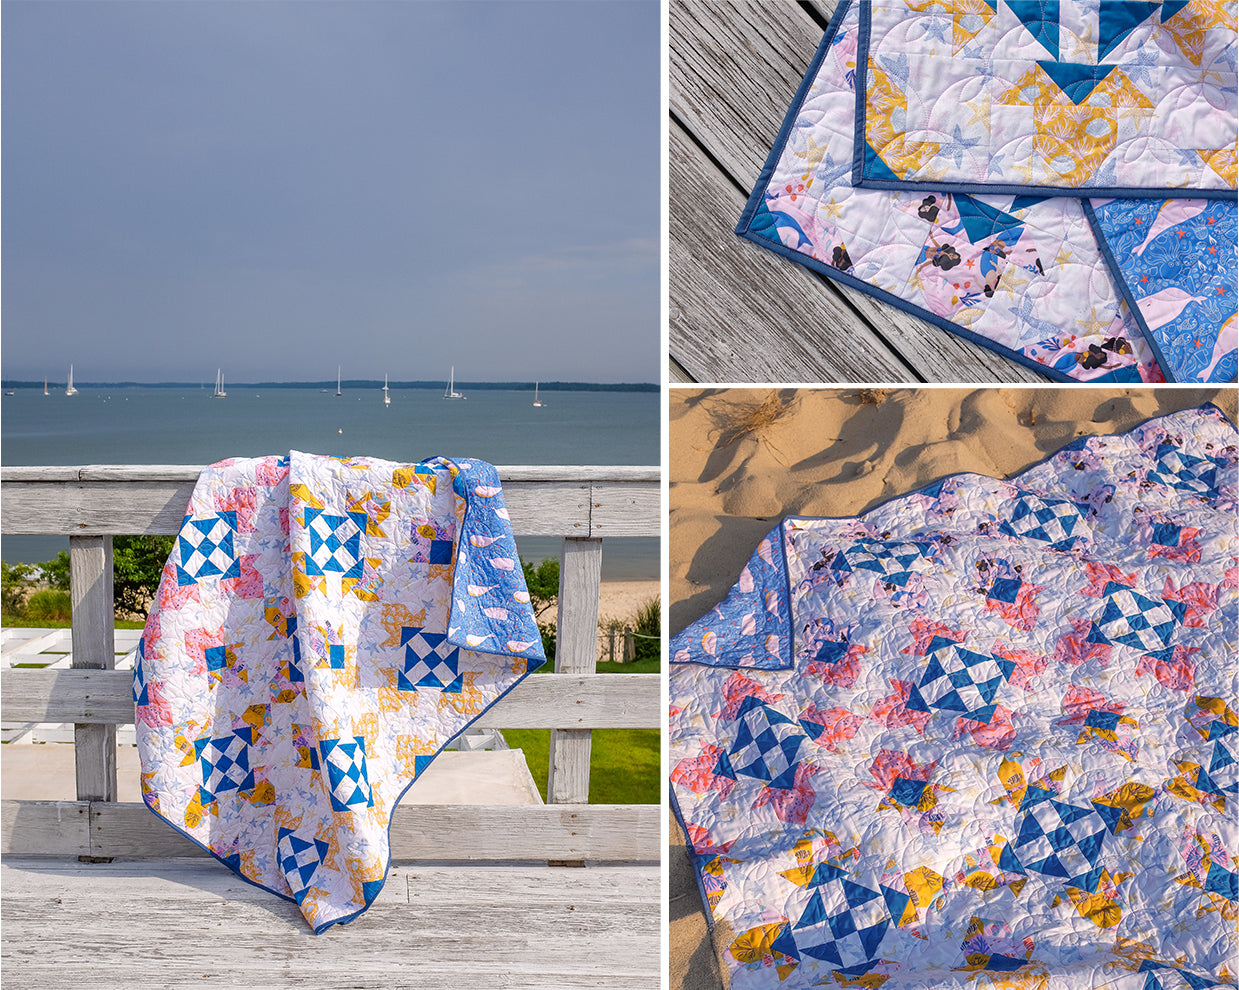 Build your no-waste flying geese, 8-in-1 half-square triangles and quick corner units skills with this free Ocean Gems quilt pattern by The Weekend Quilter for Paintbrush Studio Fabrics featuring Mable Tan Design’s Under the Sea fabric collection. #freequiltpattern 